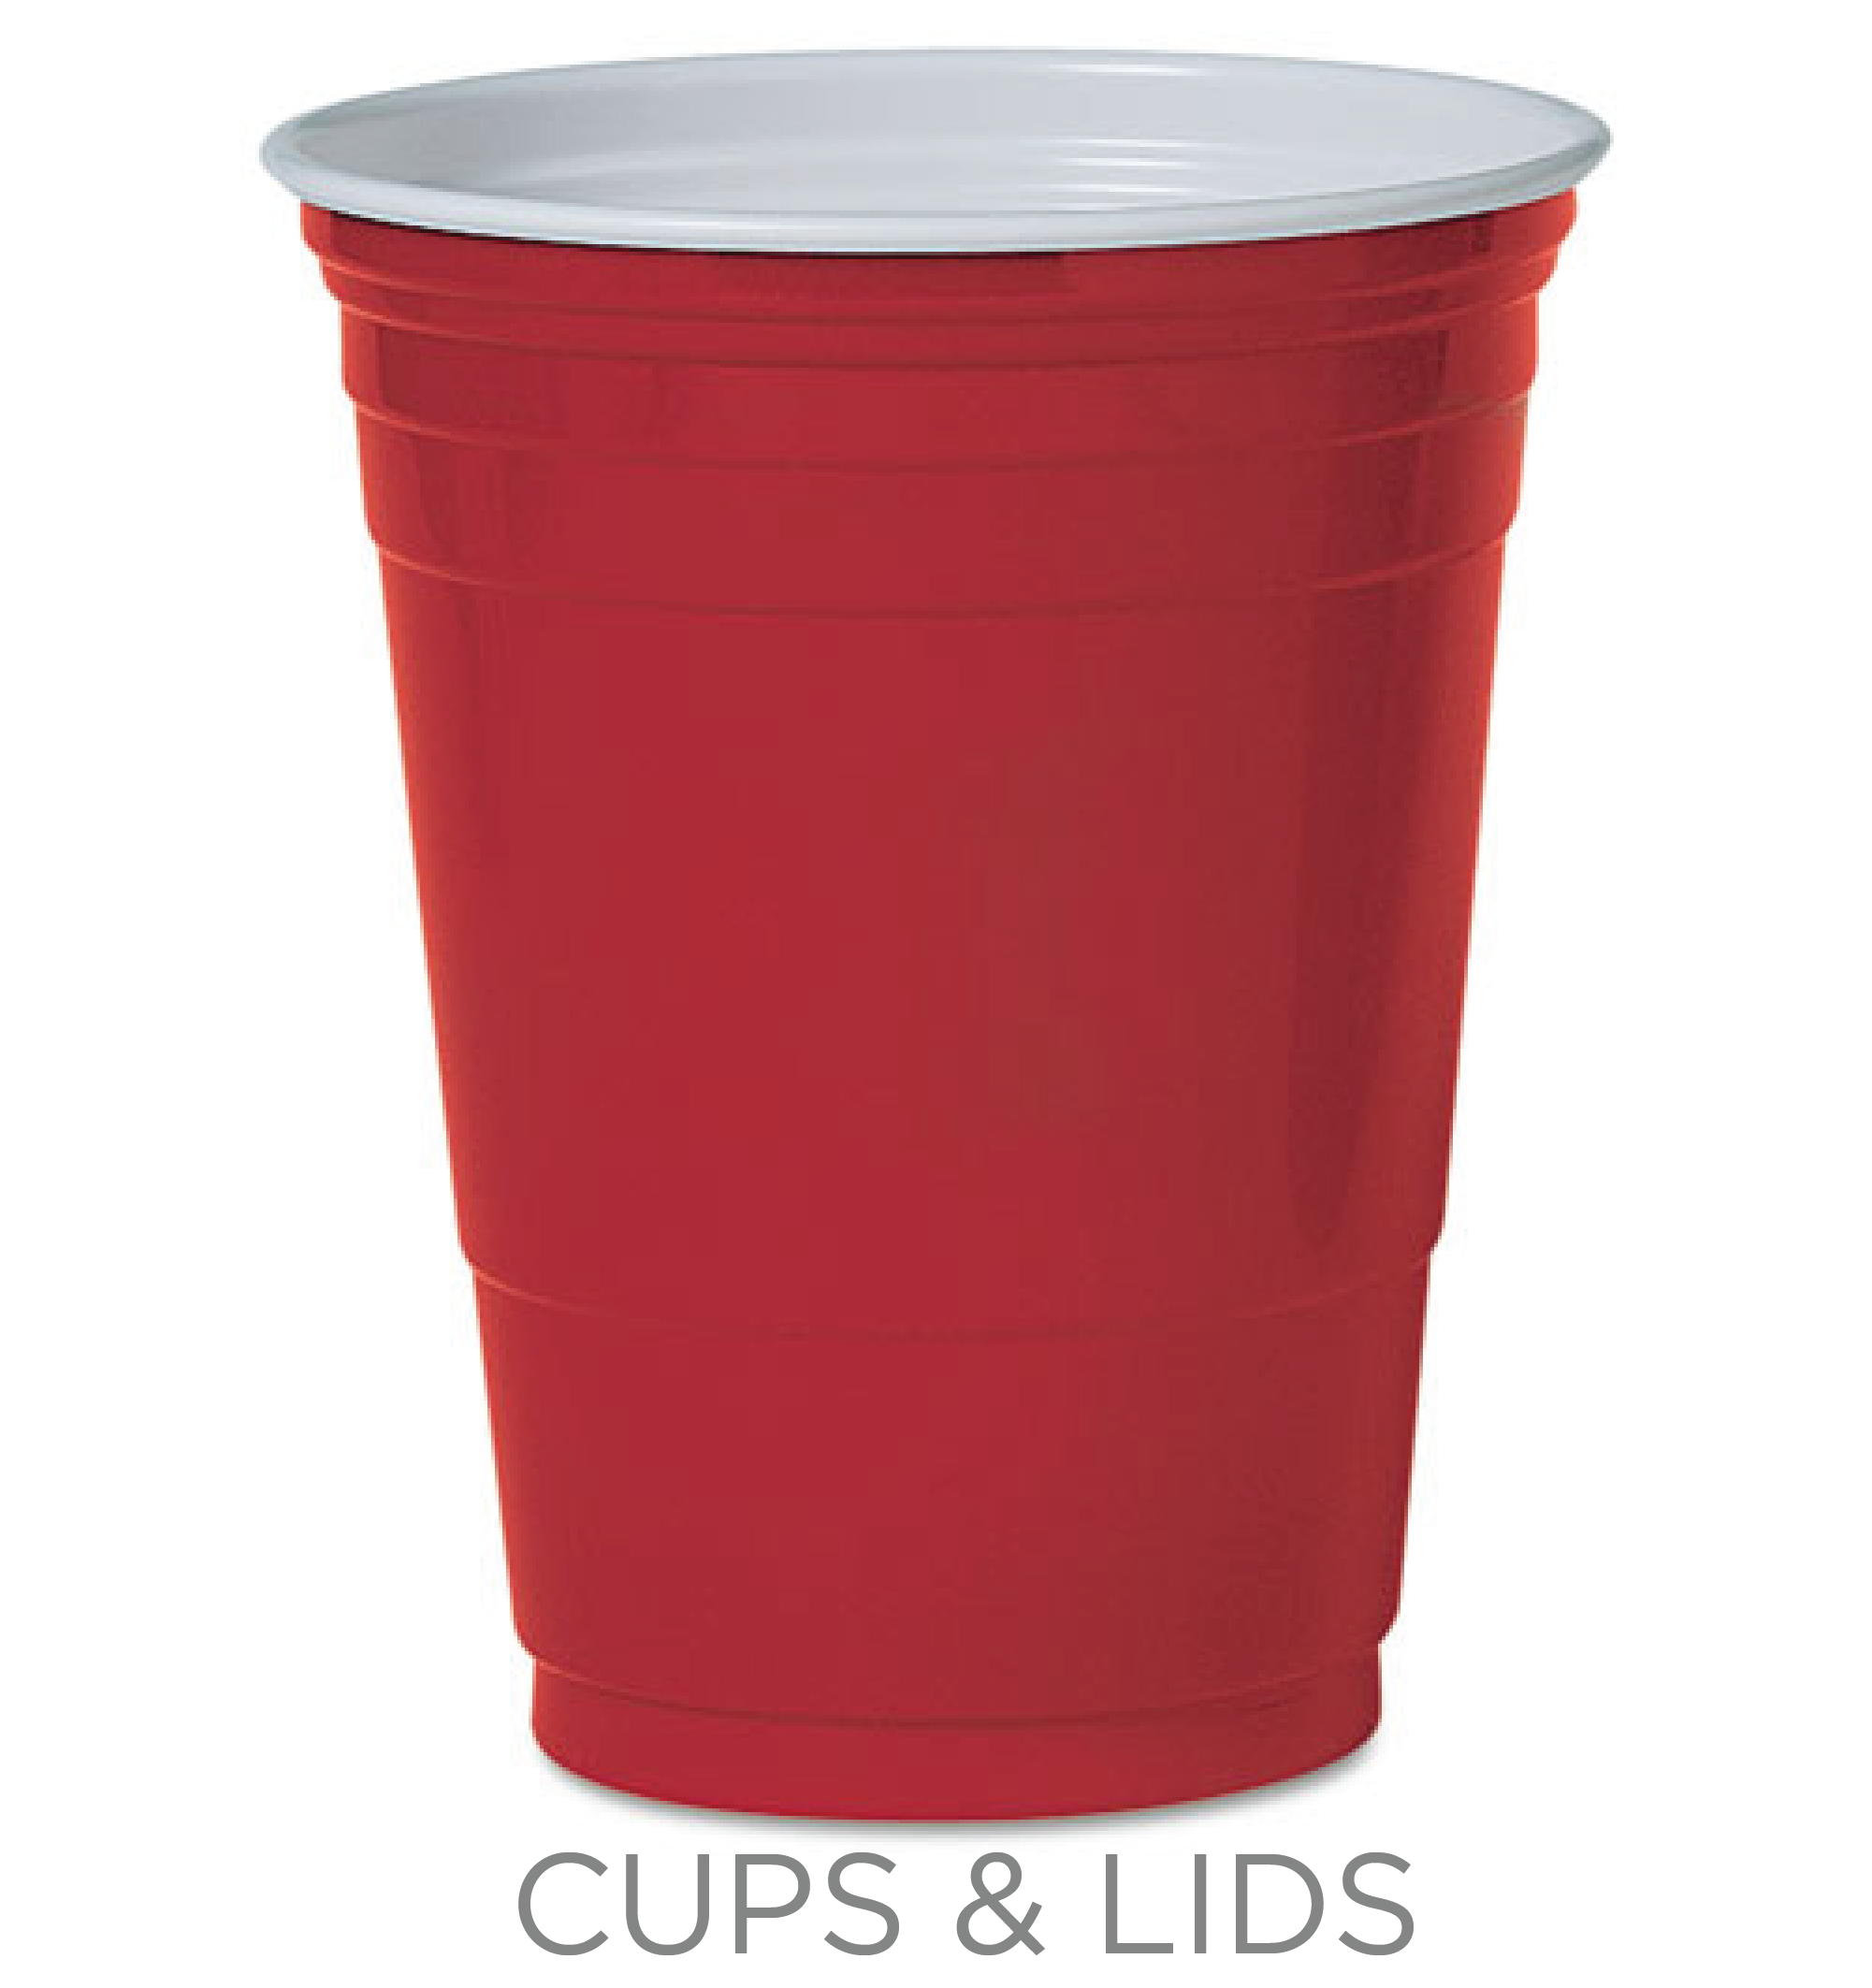 Cups & Lids - Preparing for the Holidays